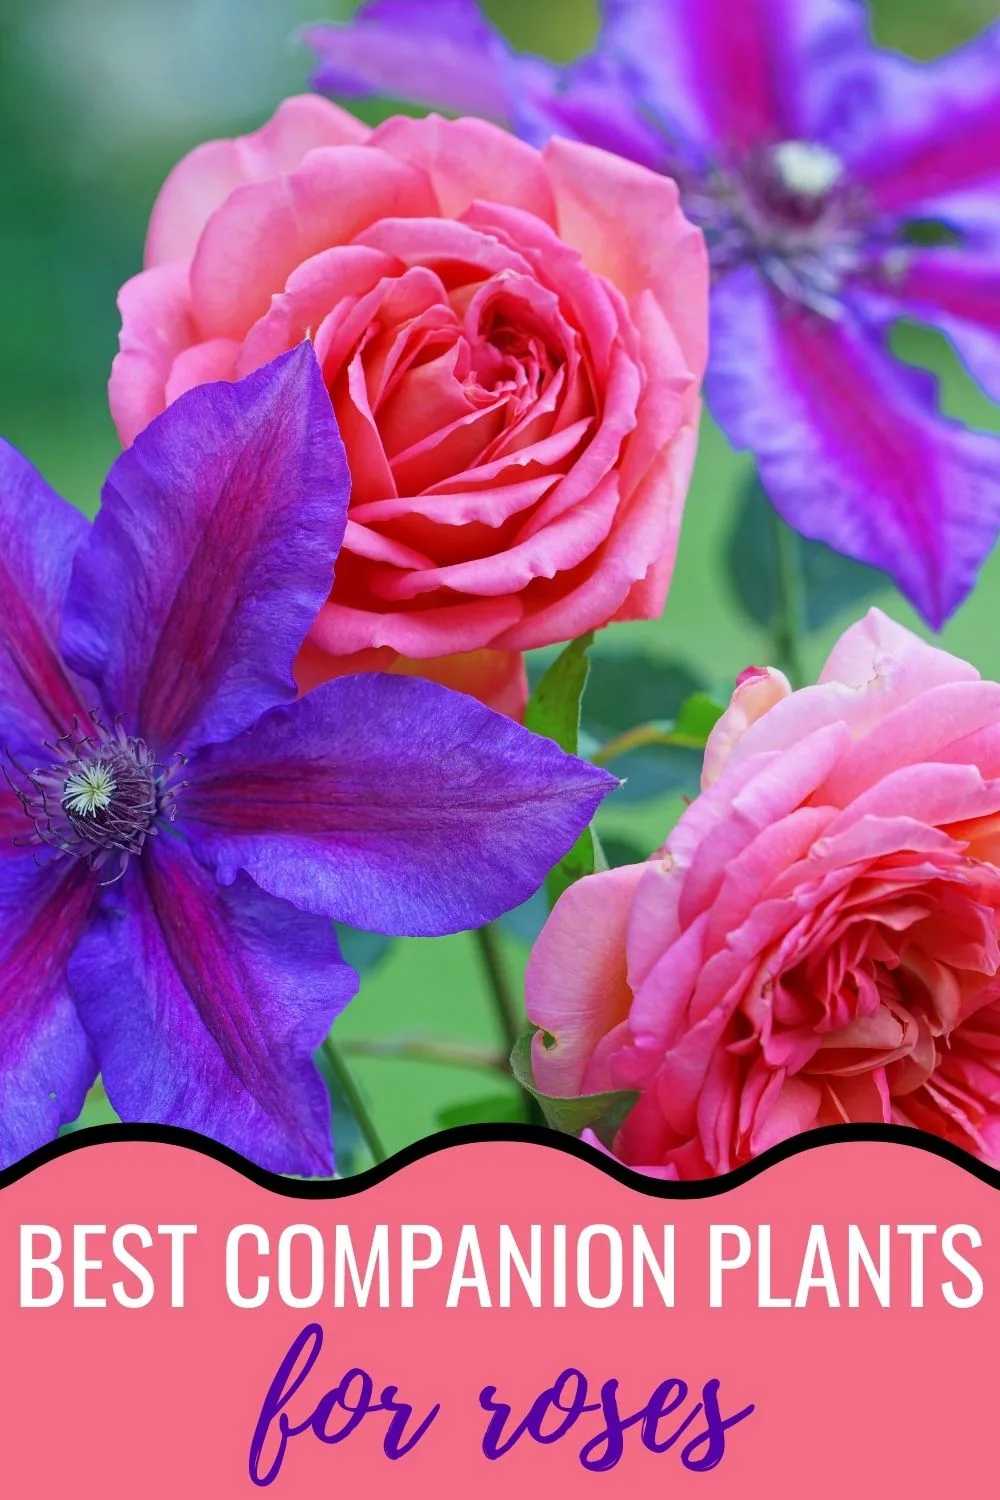 Best companion plants for roses